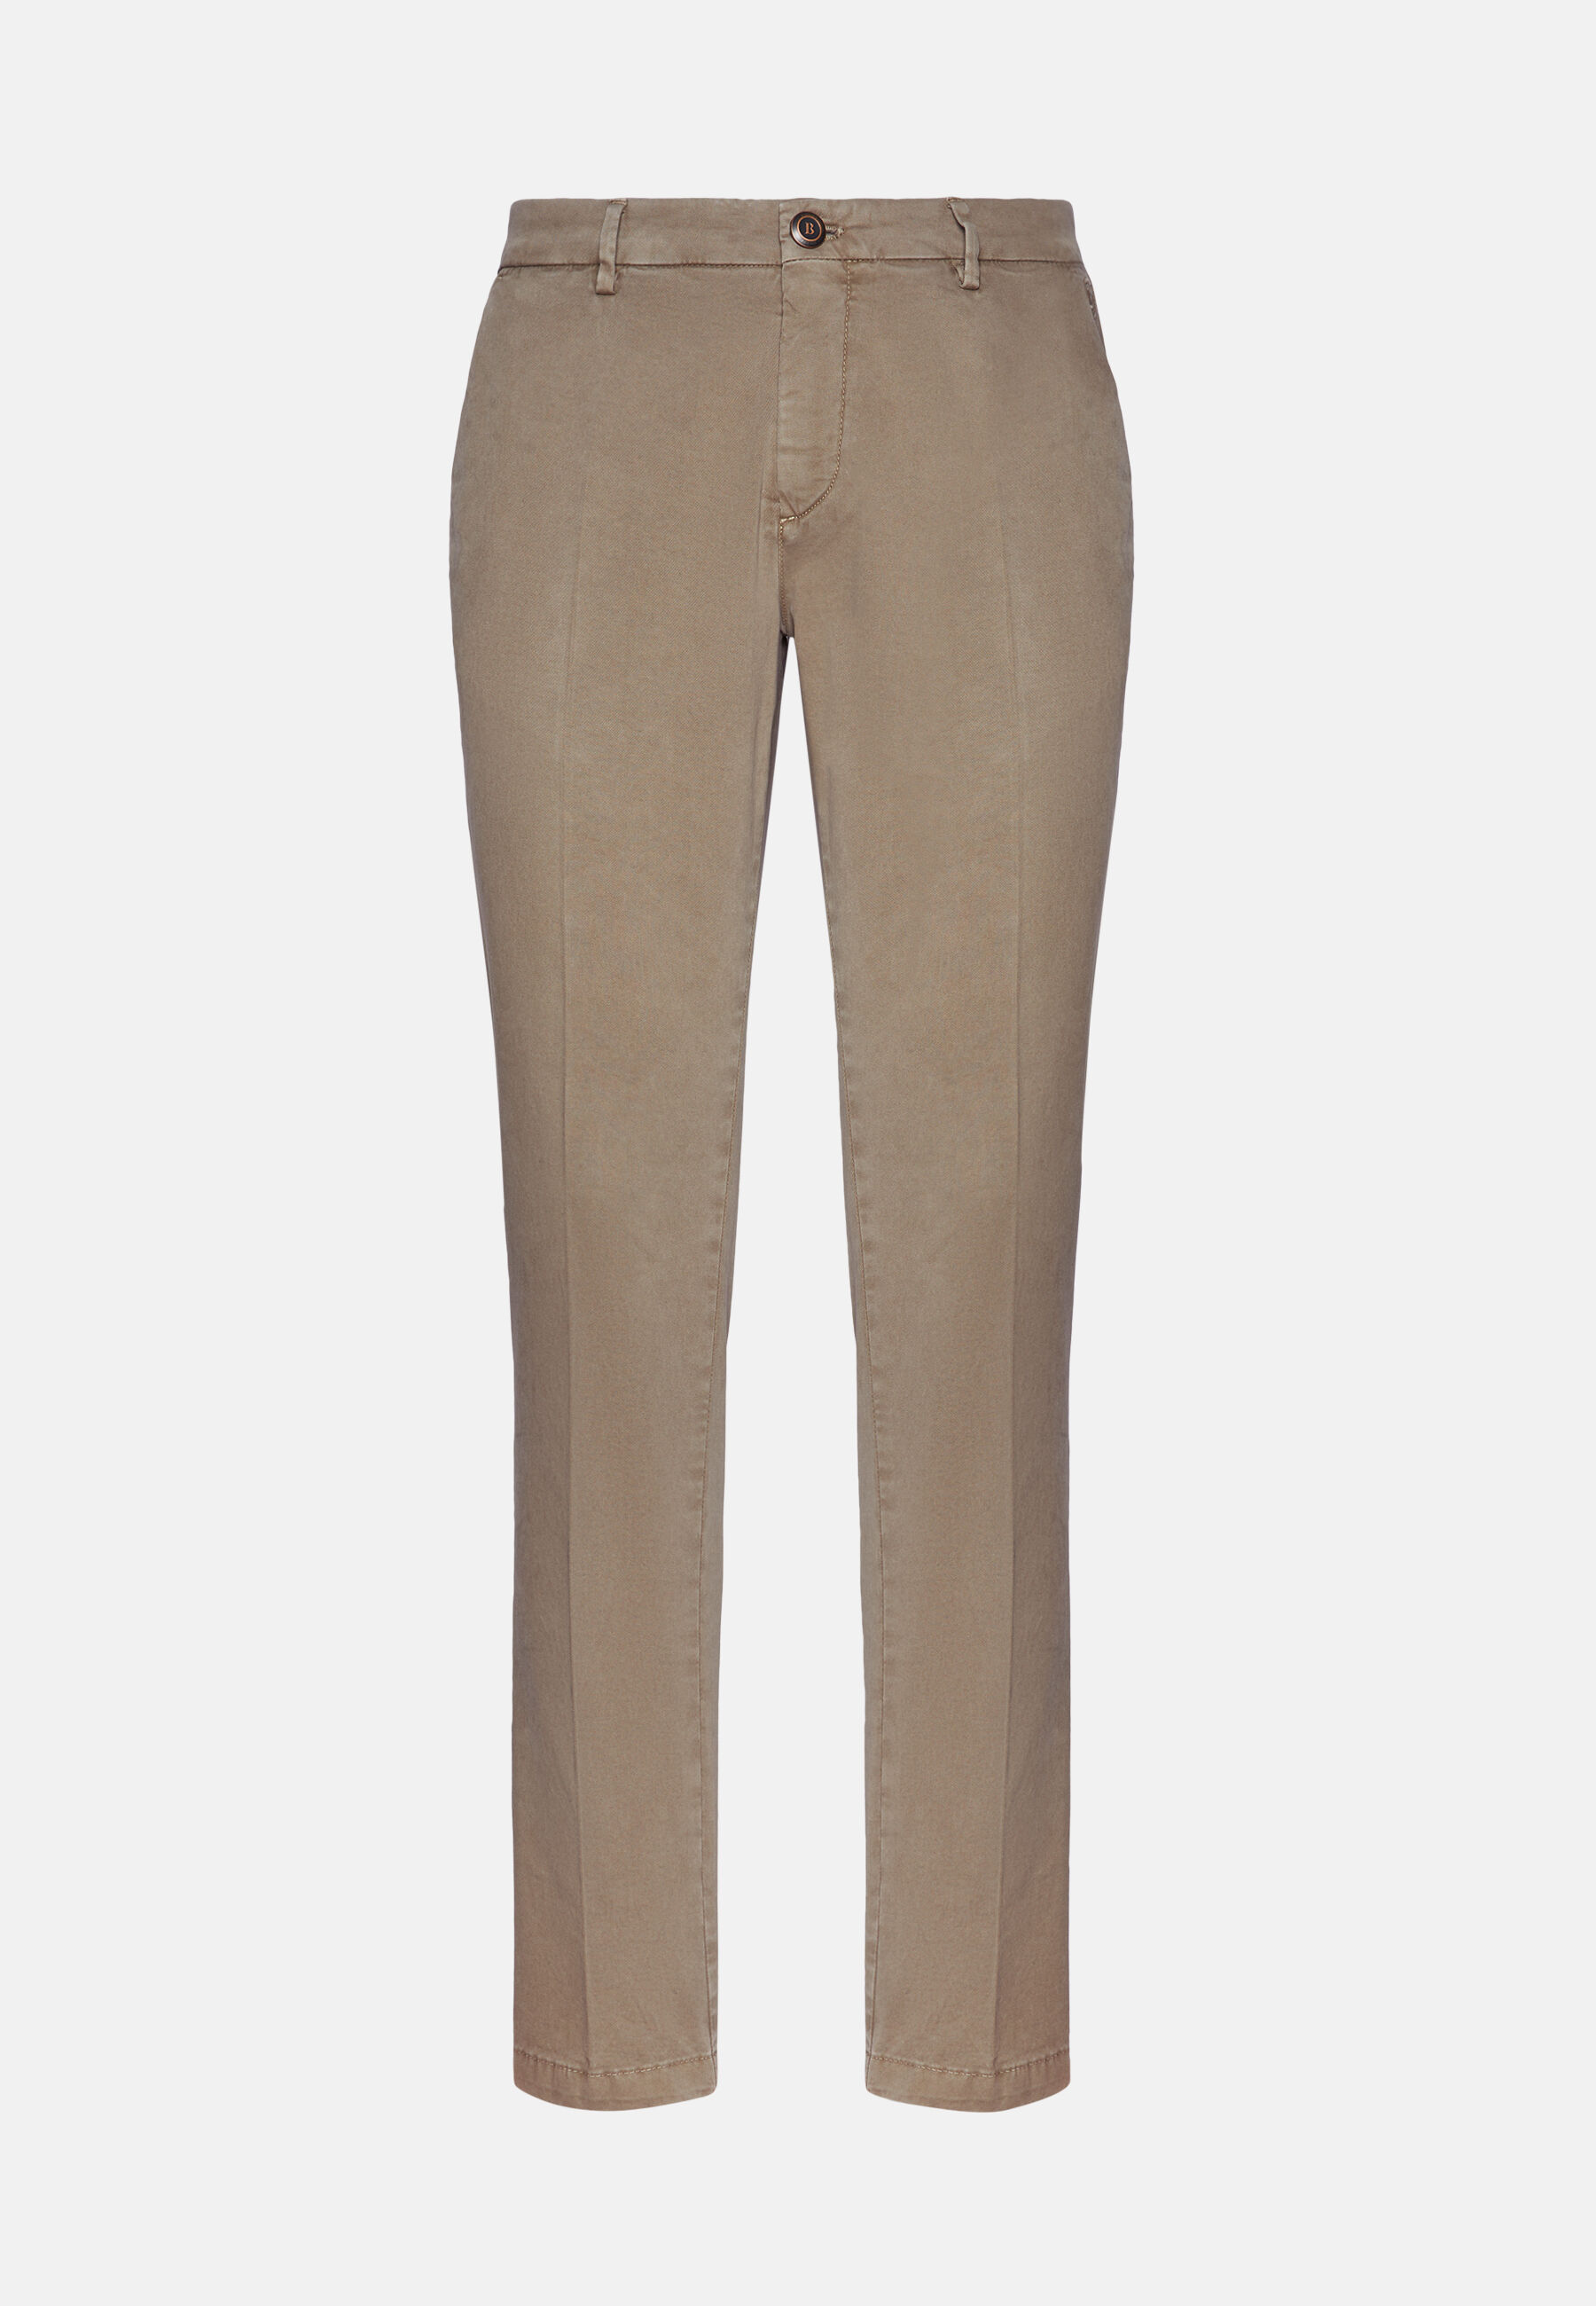 Taupe Trousers  Buy Taupe Trousers online in India